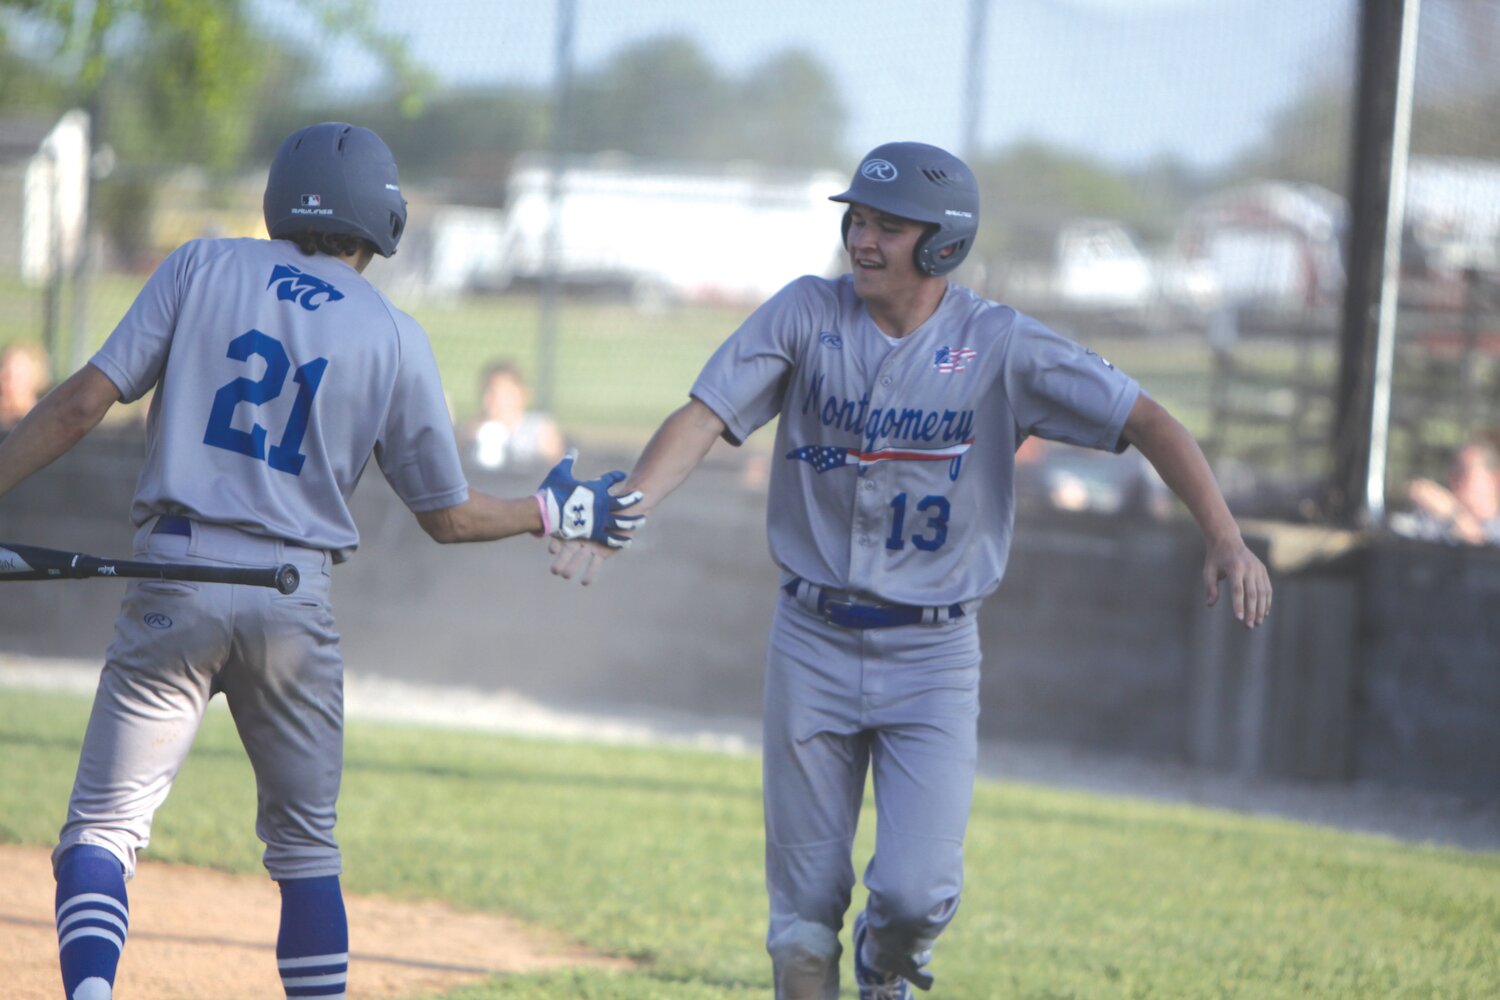 Montgomery County junior centerfielder Mason Leu, right, is congratulated by junior Dayton Simmons after scoring a run in the top of the seventh against North Callaway. Leu and the Wildcats won 7-0 to clinch a share of the conference title with Elsberry at 9-1.